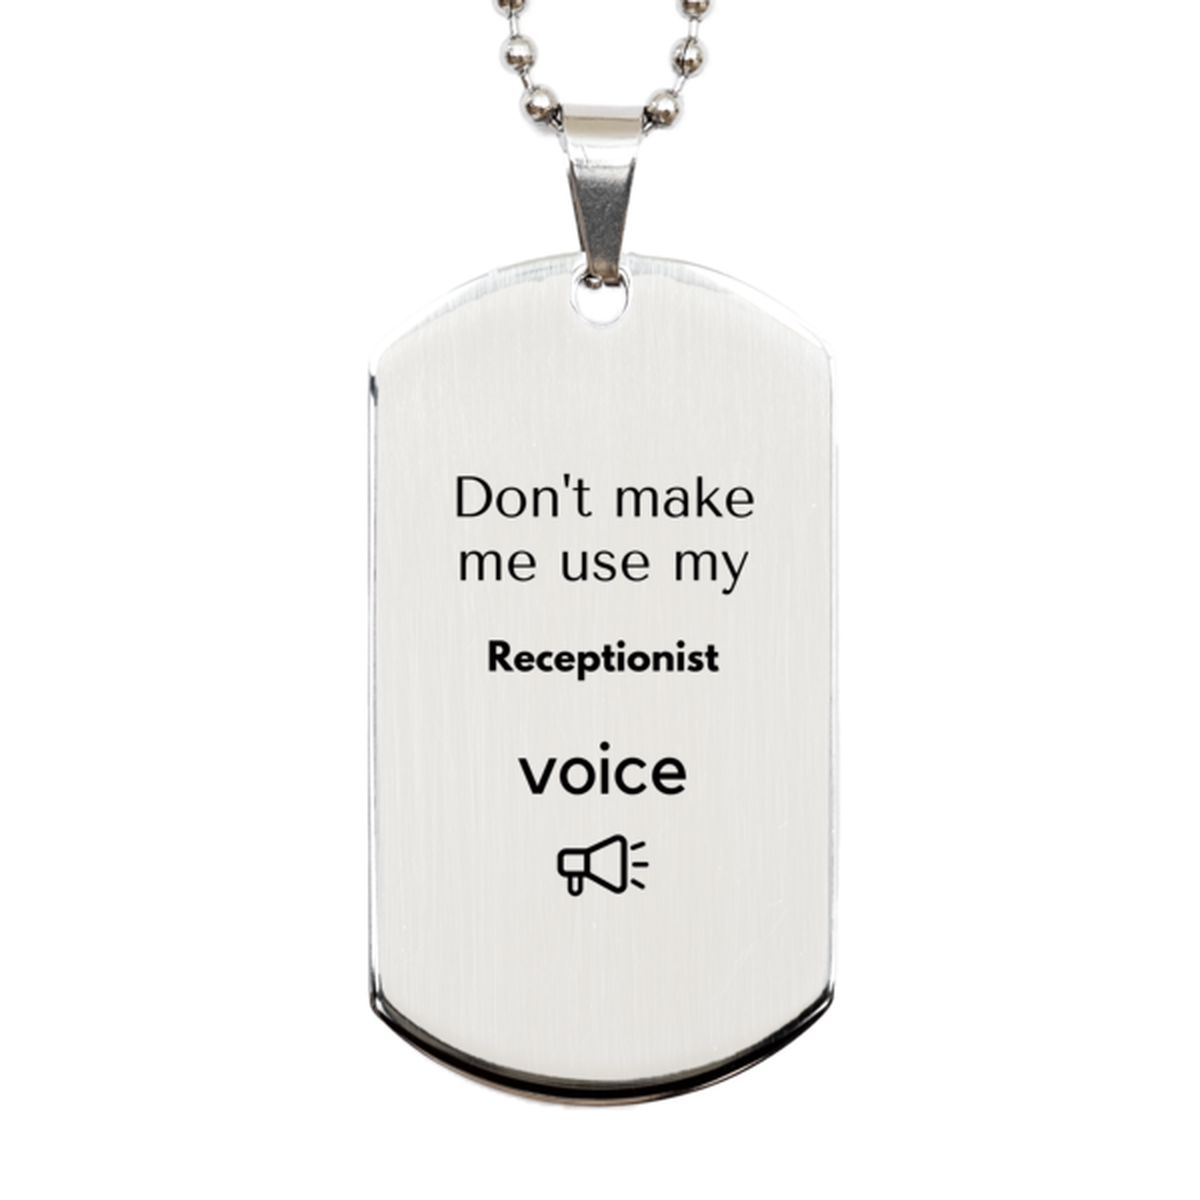 Don't make me use my Receptionist voice, Sarcasm Receptionist Gifts, Christmas Receptionist Silver Dog Tag Birthday Unique Gifts For Receptionist Coworkers, Men, Women, Colleague, Friends